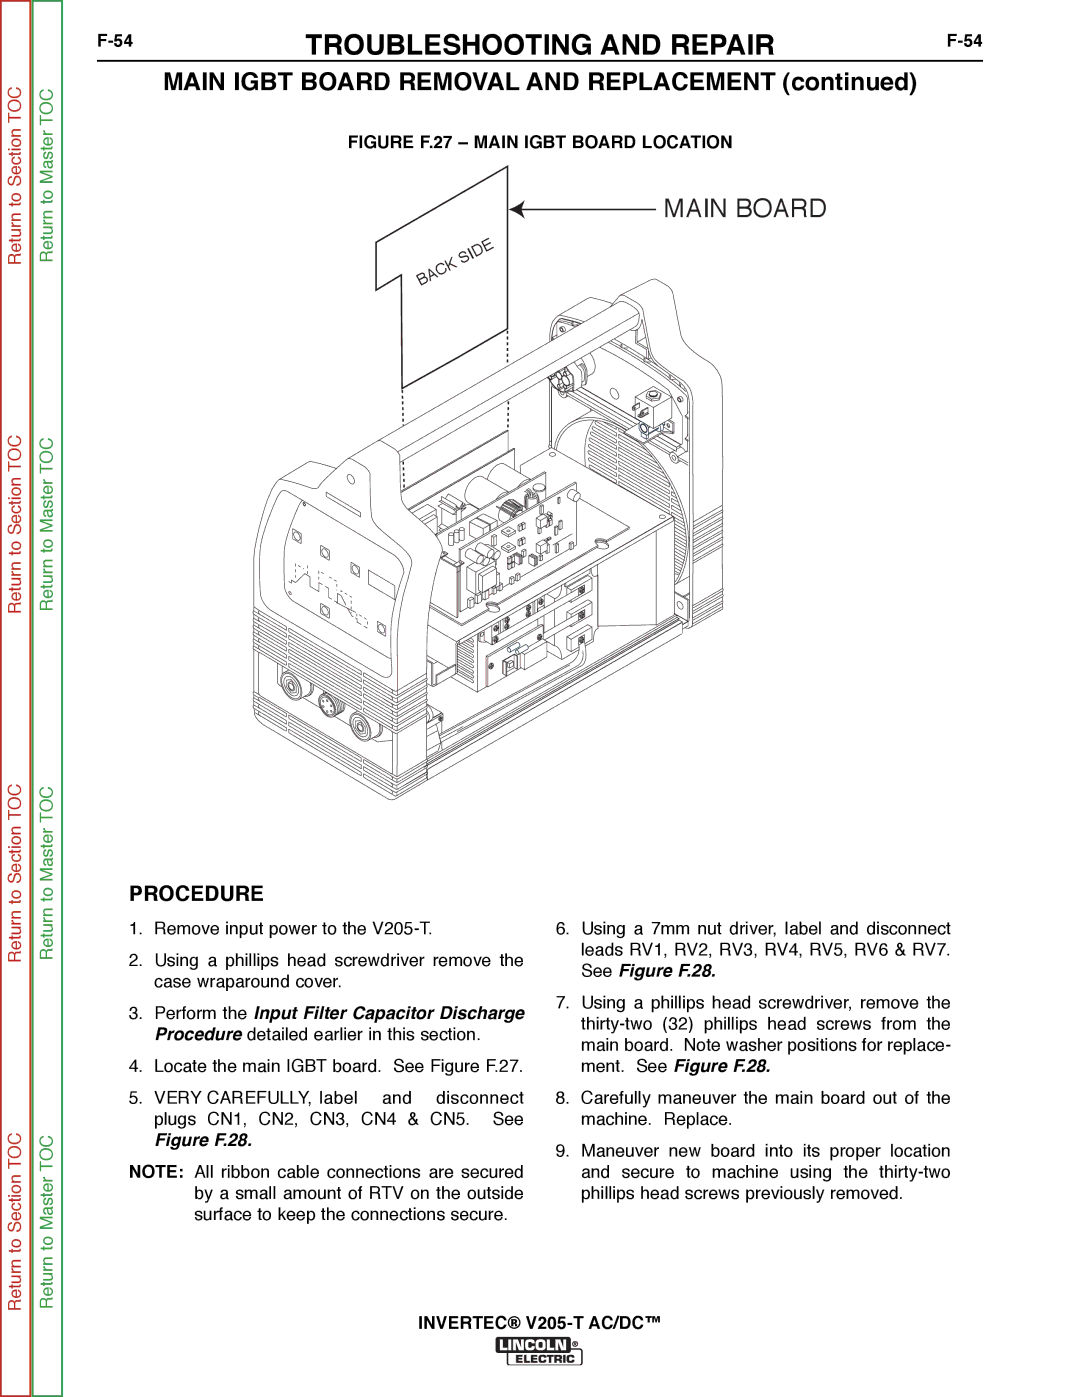 Lincoln Electric SVM161-A service manual Main Igbt Board Removal and Replacement, Figure F.27 Main Igbt Board Location 